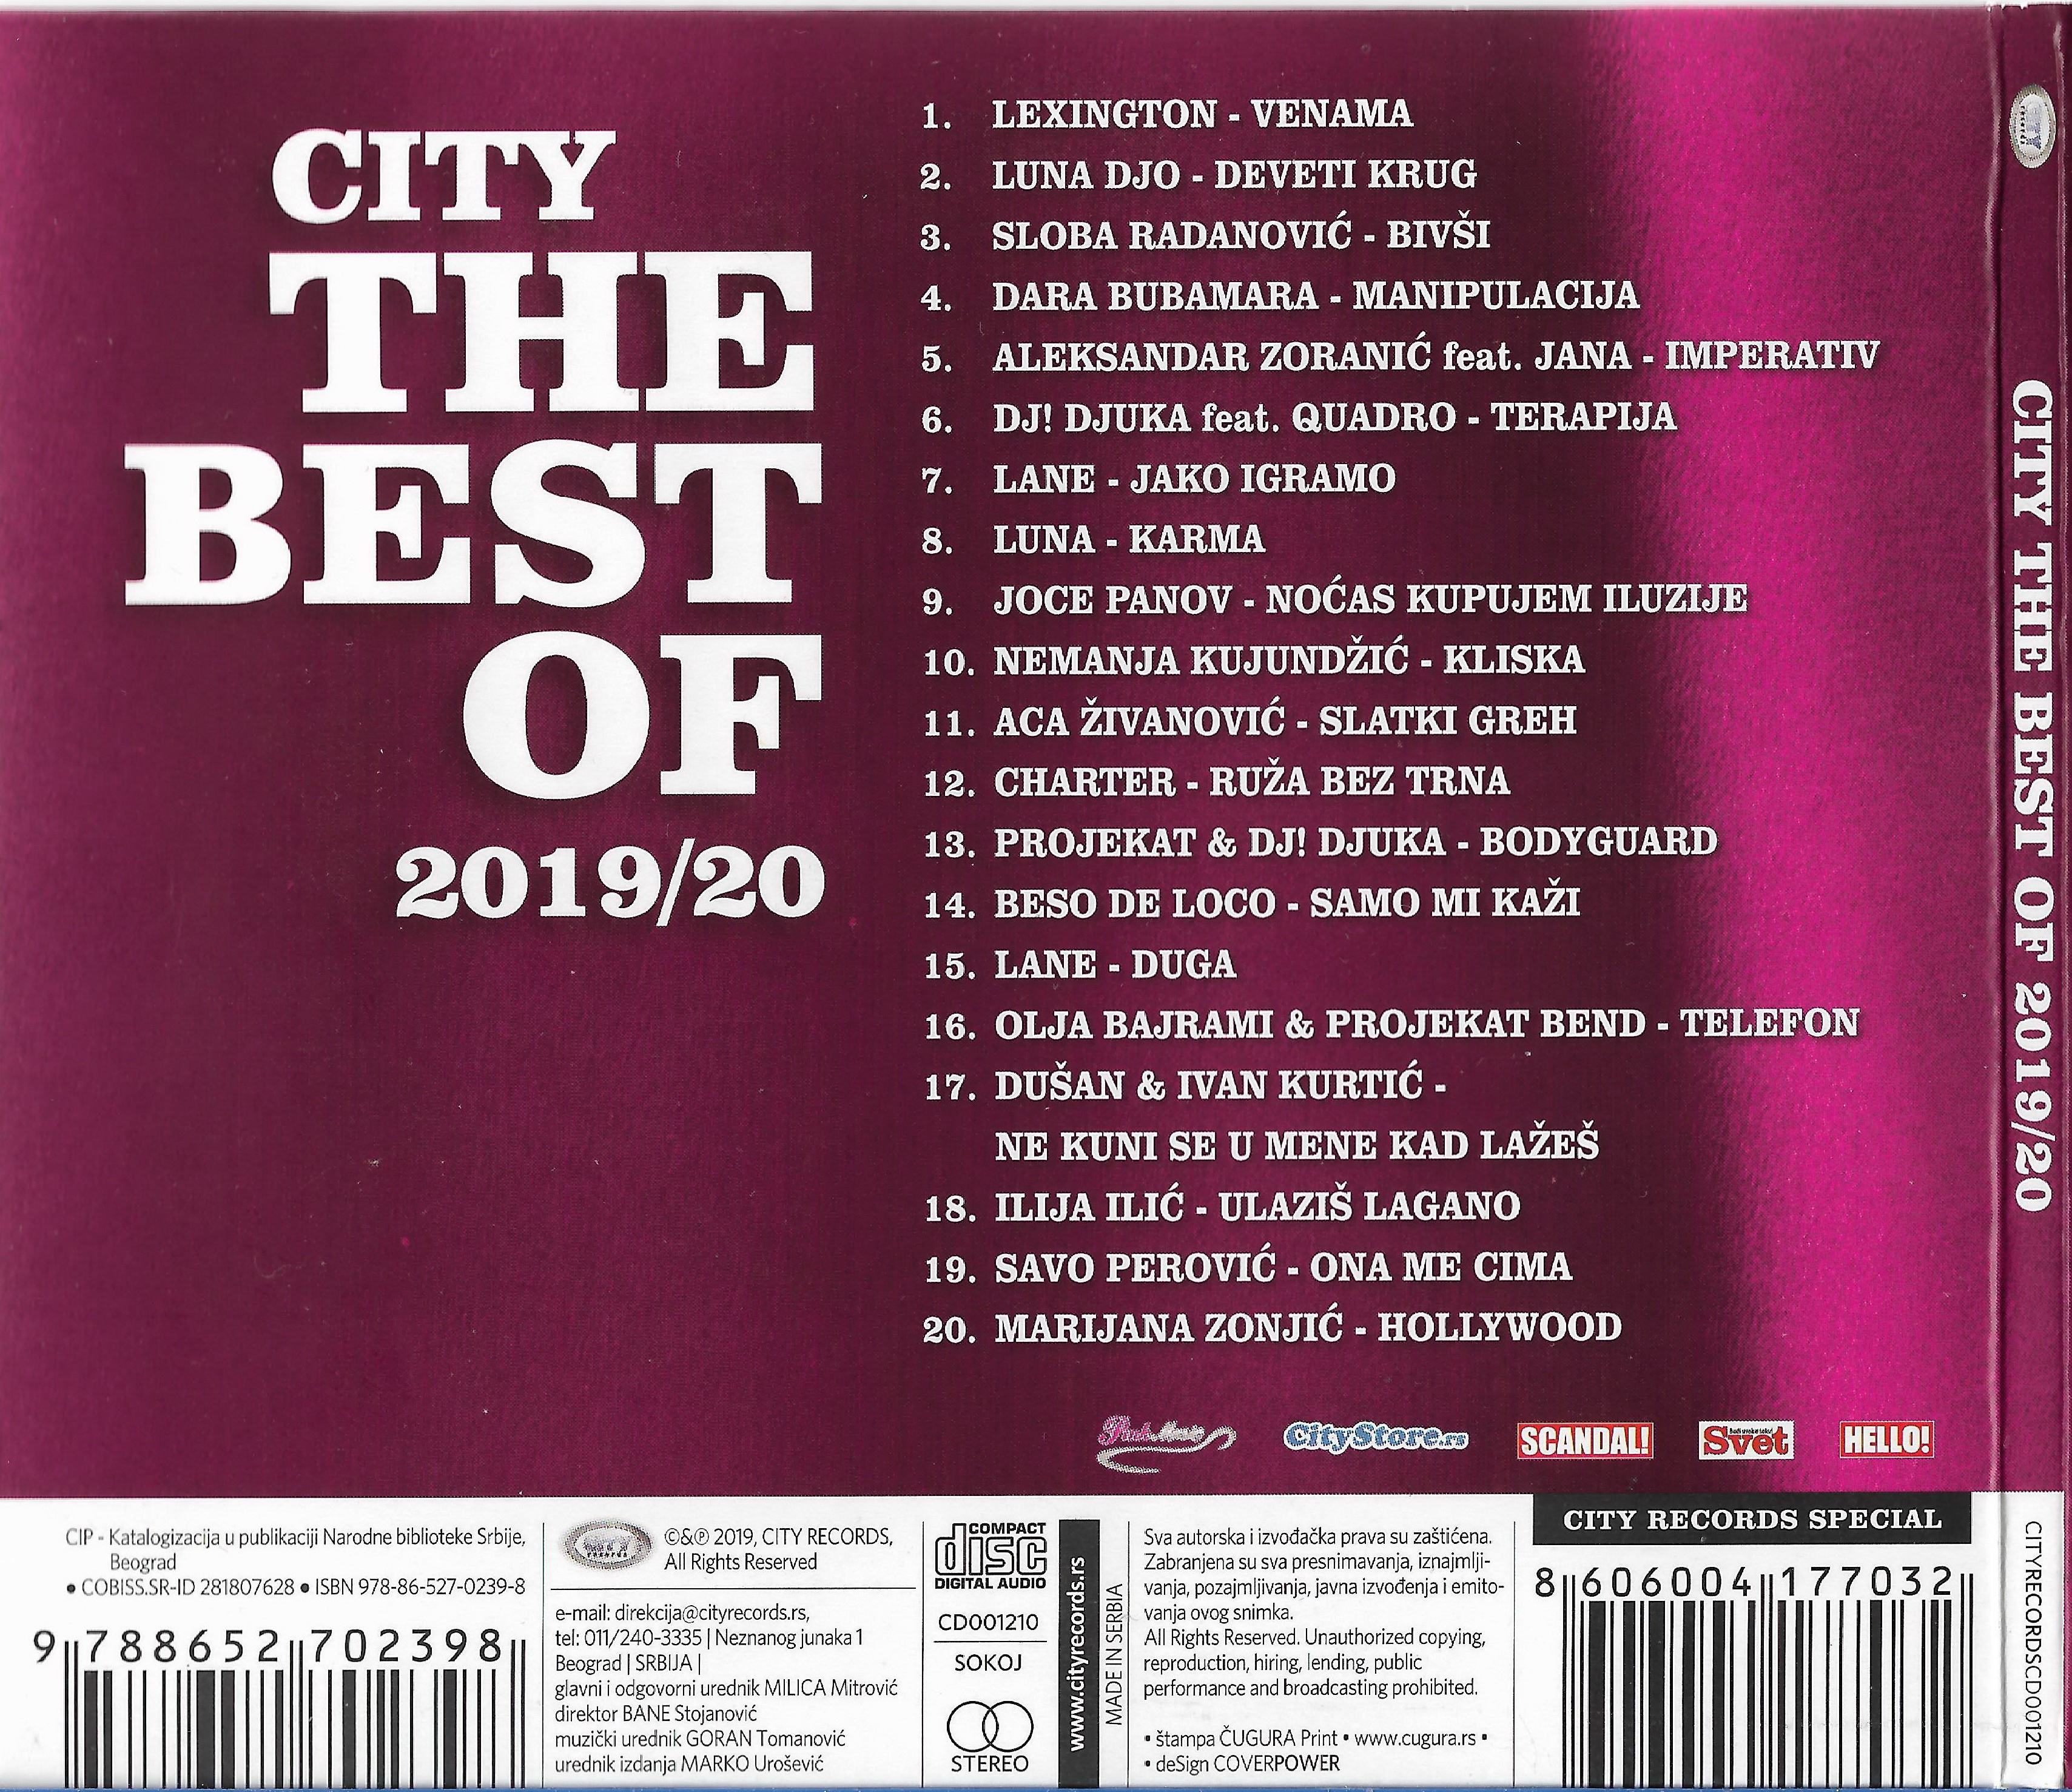 City The Best Of 201920 1 b